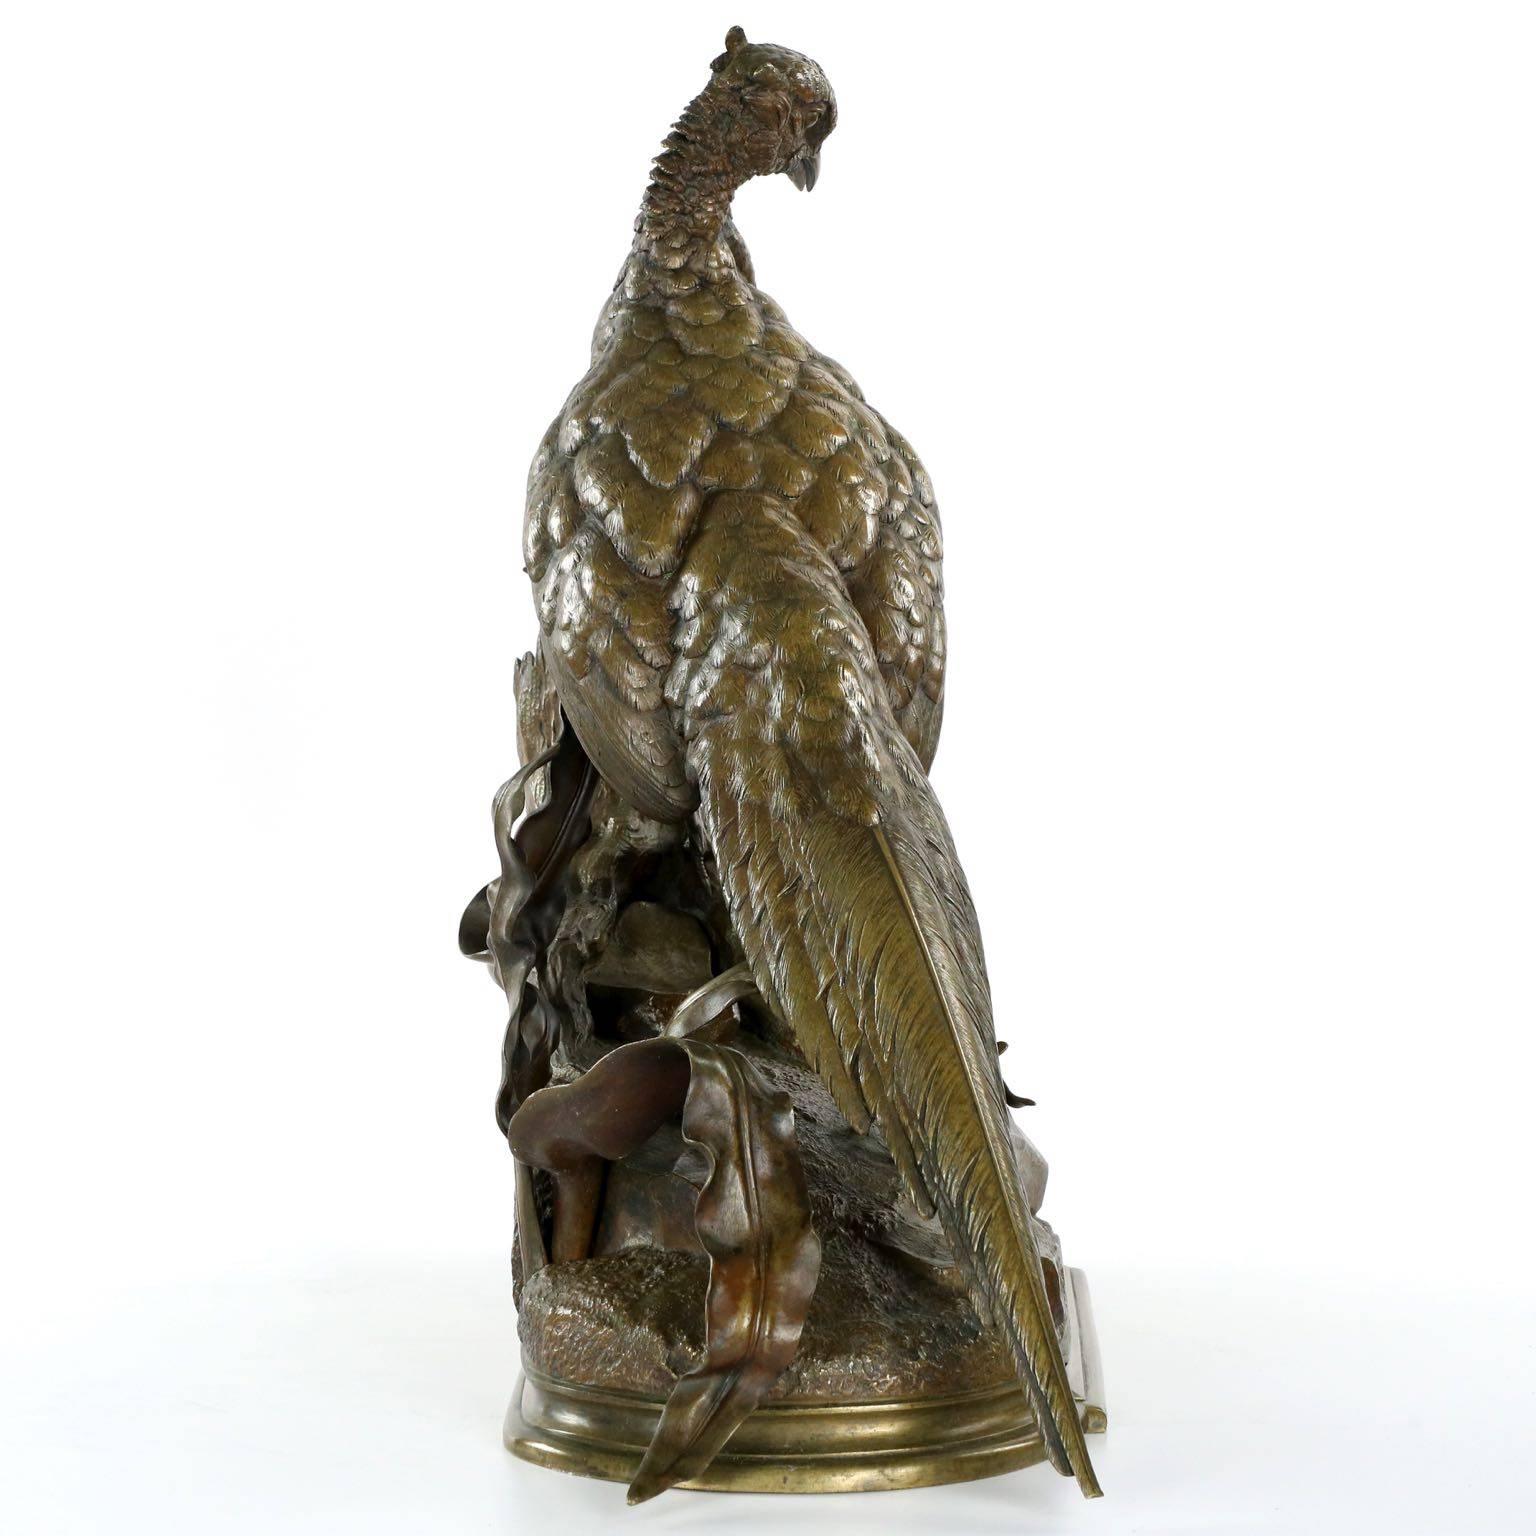 A large and complex group, this sculpture is cast using the lost wax method in many individual parts that are then painstakingly chiseled and joined to create a fully developed naturalistic landscape. Originally exhibited in 1864 (Mackay, p. 78),